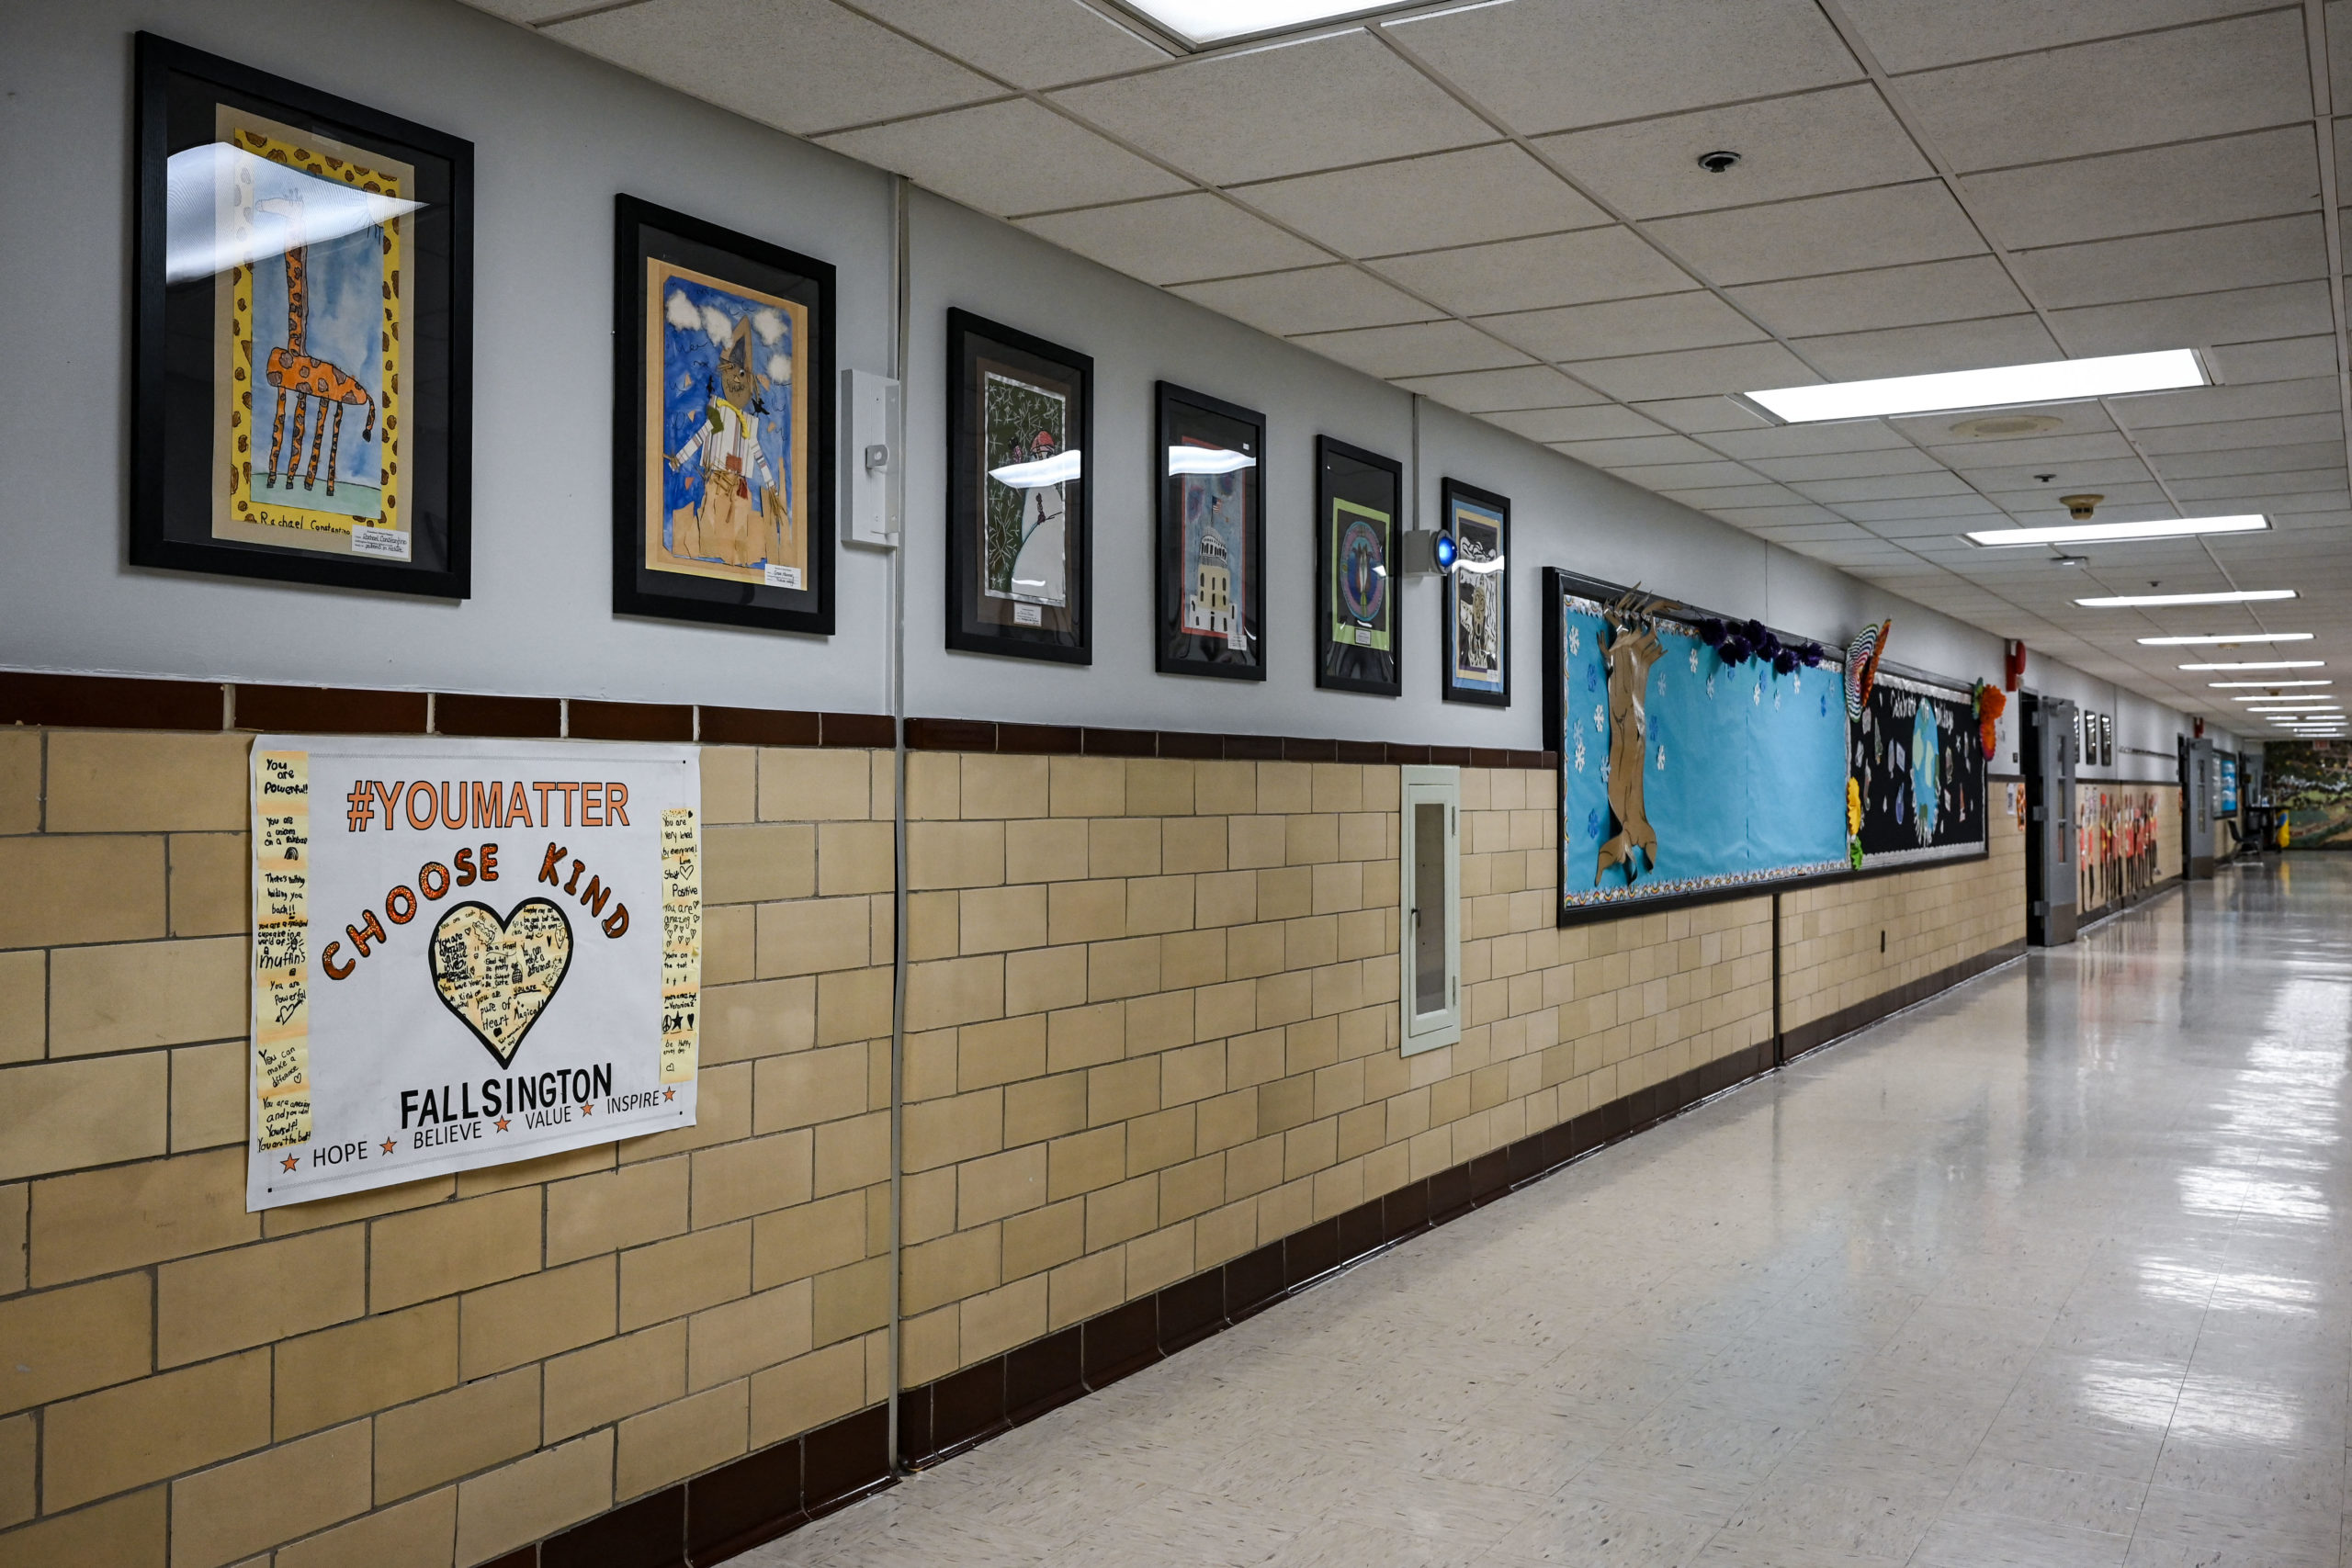 View of the corridor at Fallsington Elementary School in Levittown, Pennsylvania on December 16, 2021. - As Joshua Waldorf was running for a third term on the Pennsbury school board in November, one particularly heated debate triggered a flood of vitriolic messages to his inbox -- one of them urging him to shoot himself. In a shift mirrored in cities across America, his local council overseeing schools in the leafy suburbs of Philadelphia had unwittingly become a battleground in the politicized culture wars roiling the nation. The hateful messages aimed at Waldorf were just one example of the flow of anonymous slurs and threats directed at him and fellow members of the nine-seat board in past months -- as their once studious meetings turned to angry shouting matches. (Photo by Kylie COOPER / AFP) (Photo by KYLIE COOPER/AFP via Getty Images)